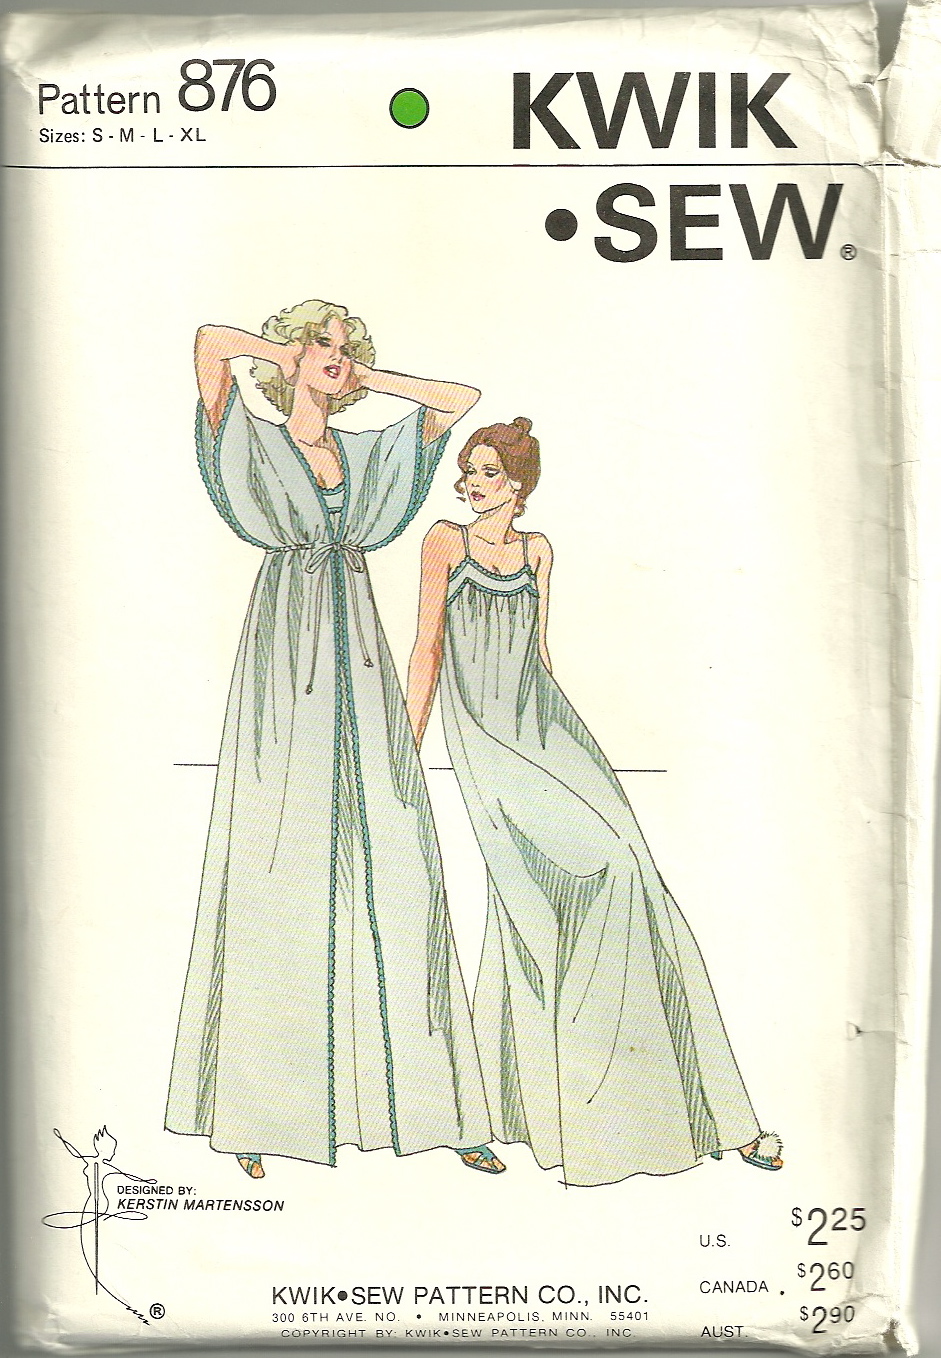 Kwik Sew - 3754 - The Sewing Place